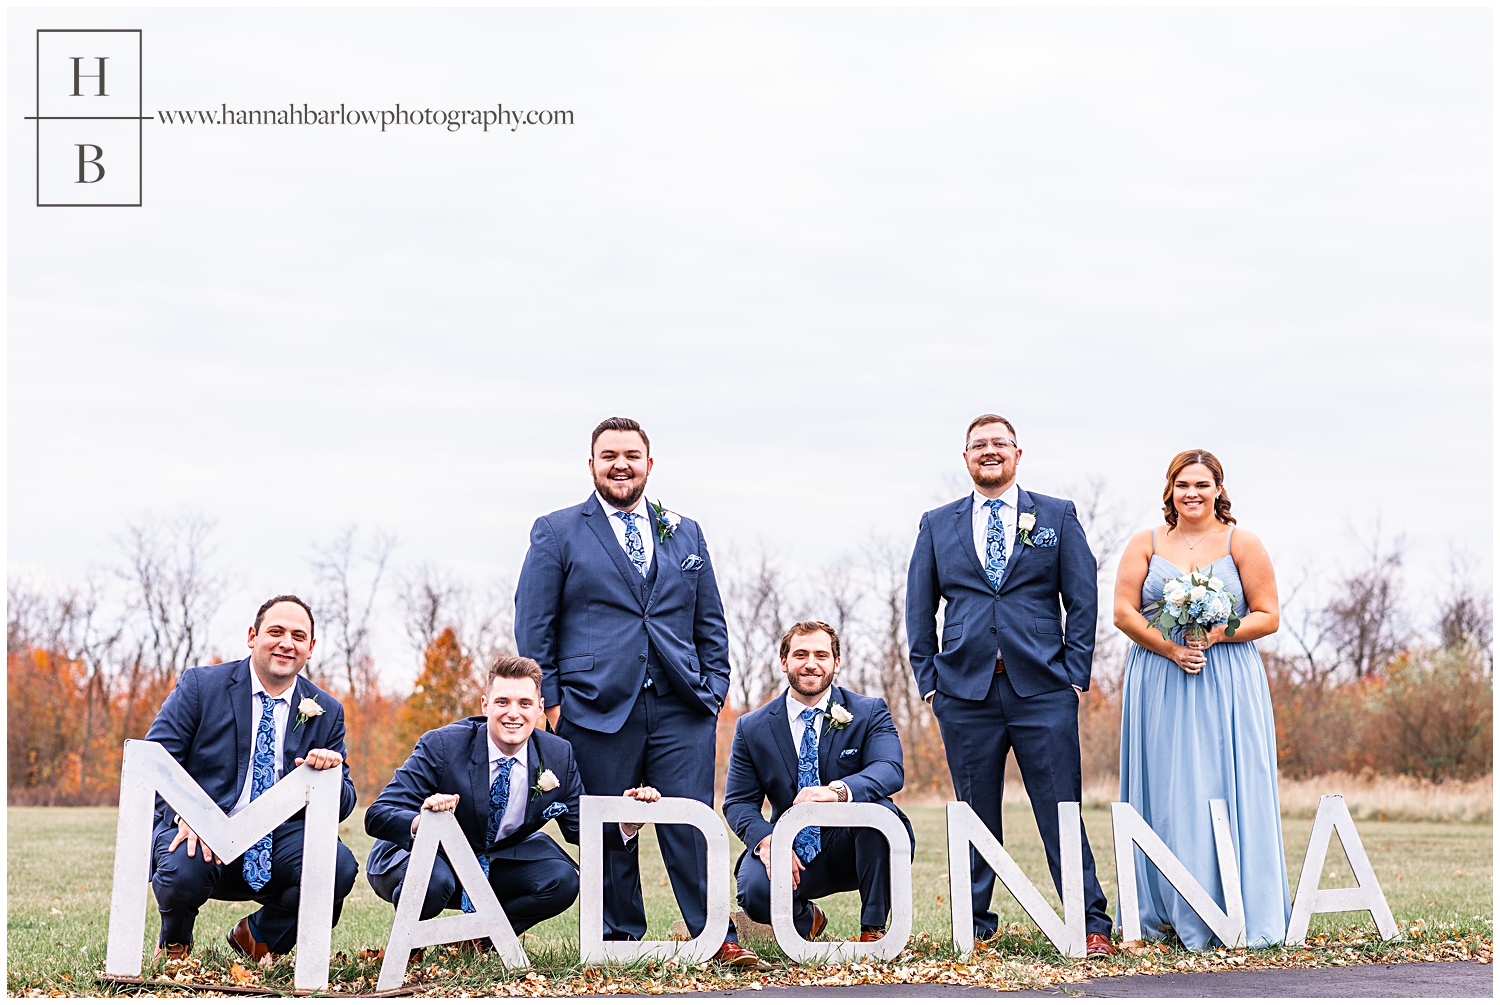 Bridal party members pose by high school Madonna sign